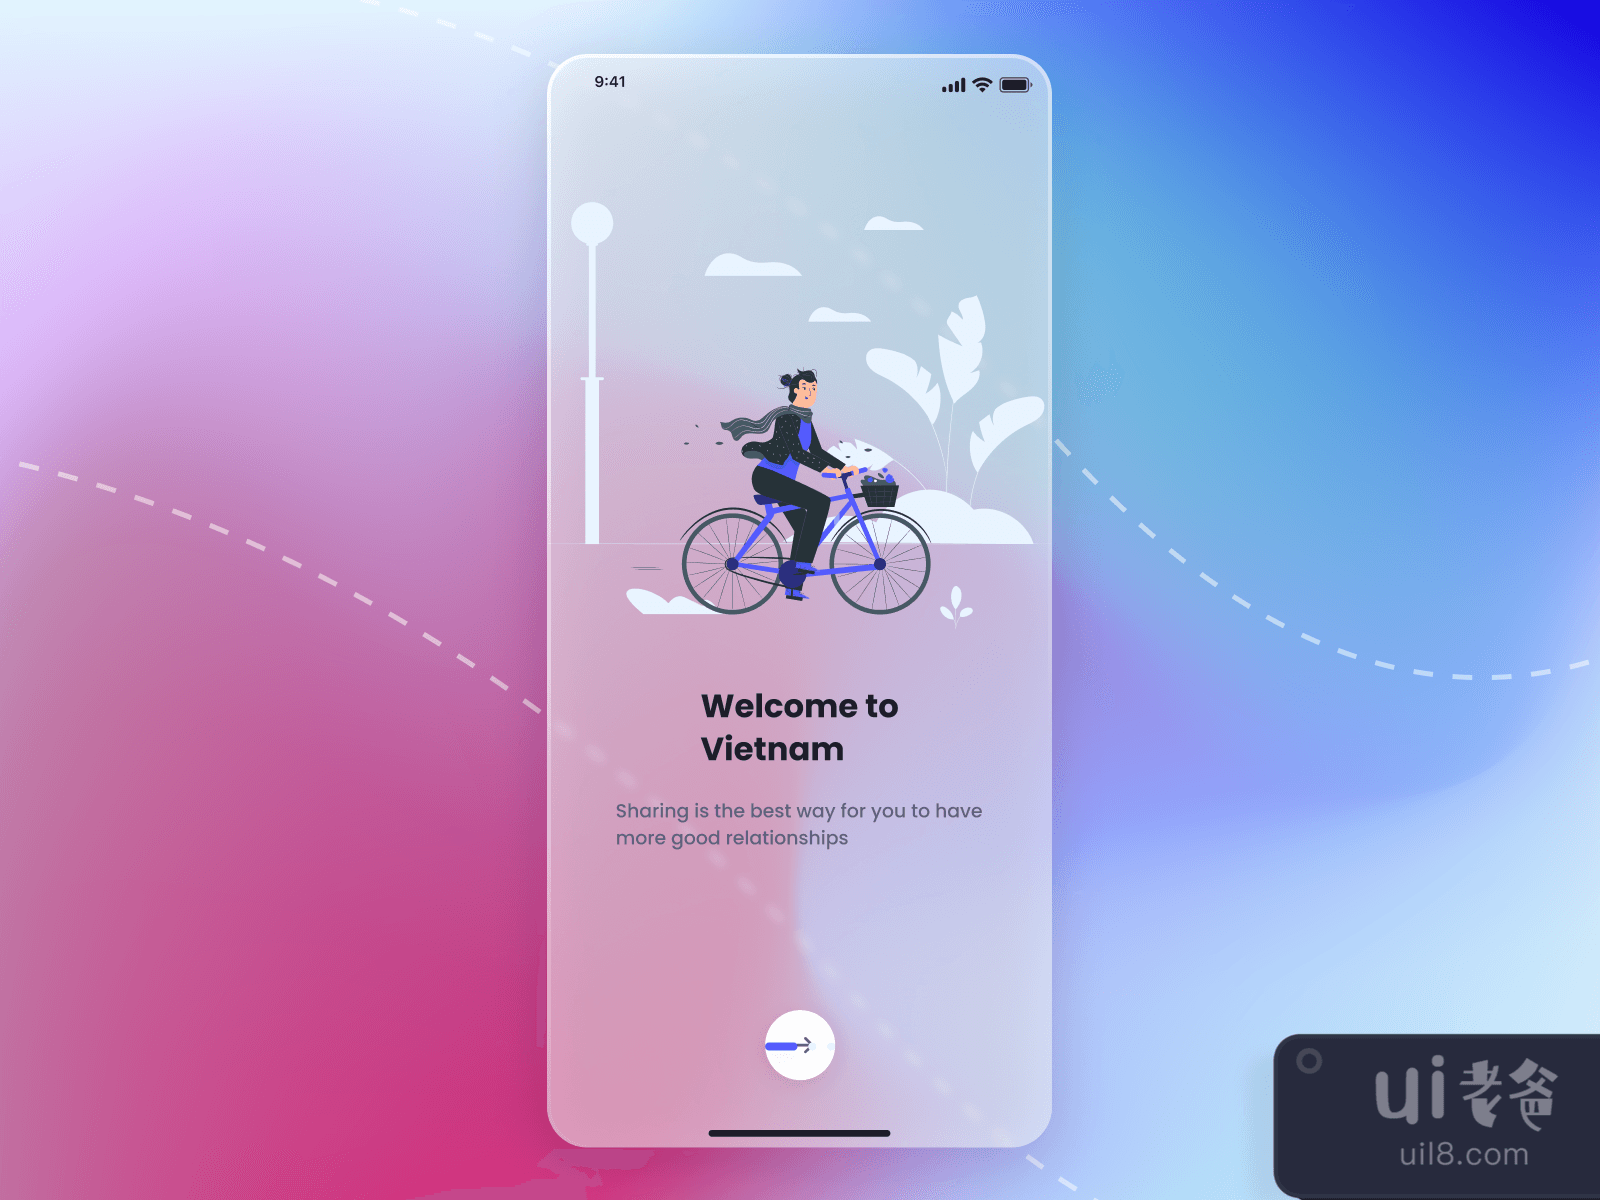 Ride Sharing Mobile App for Figma and Adobe XD No 3